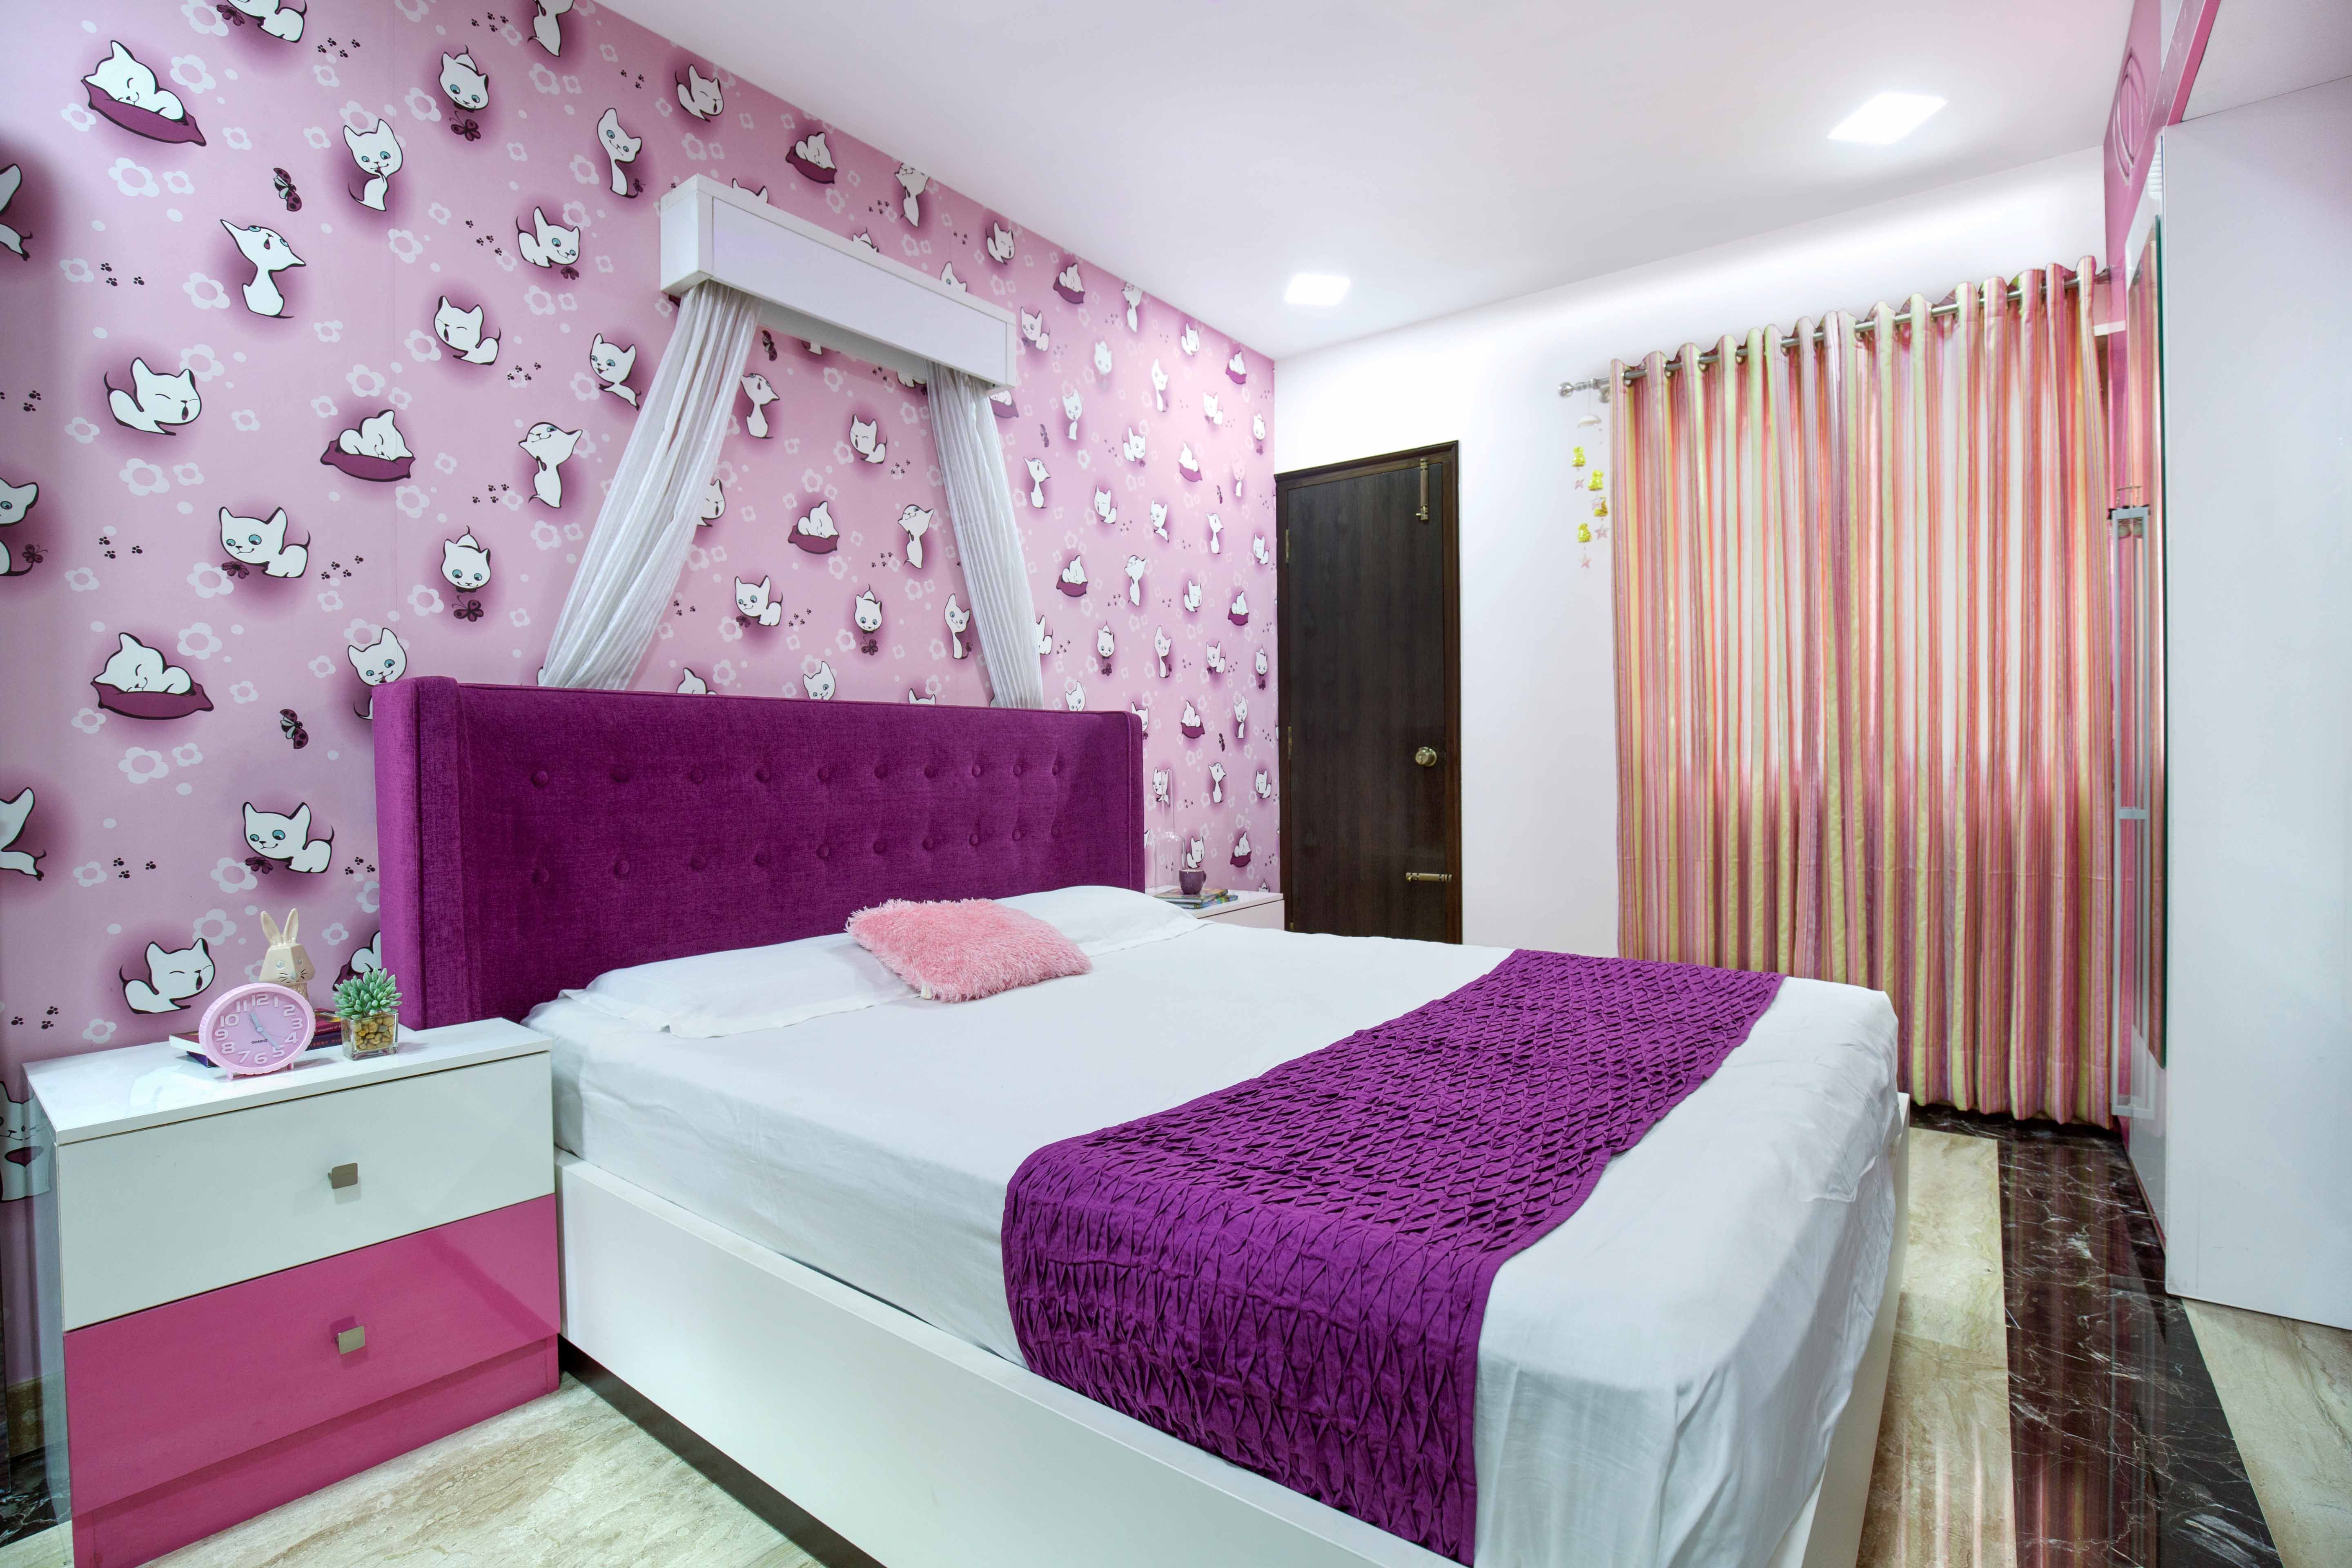 Contemporary 2-BHK Flat Design In Bangalore With Pink And White Kids Bedroom